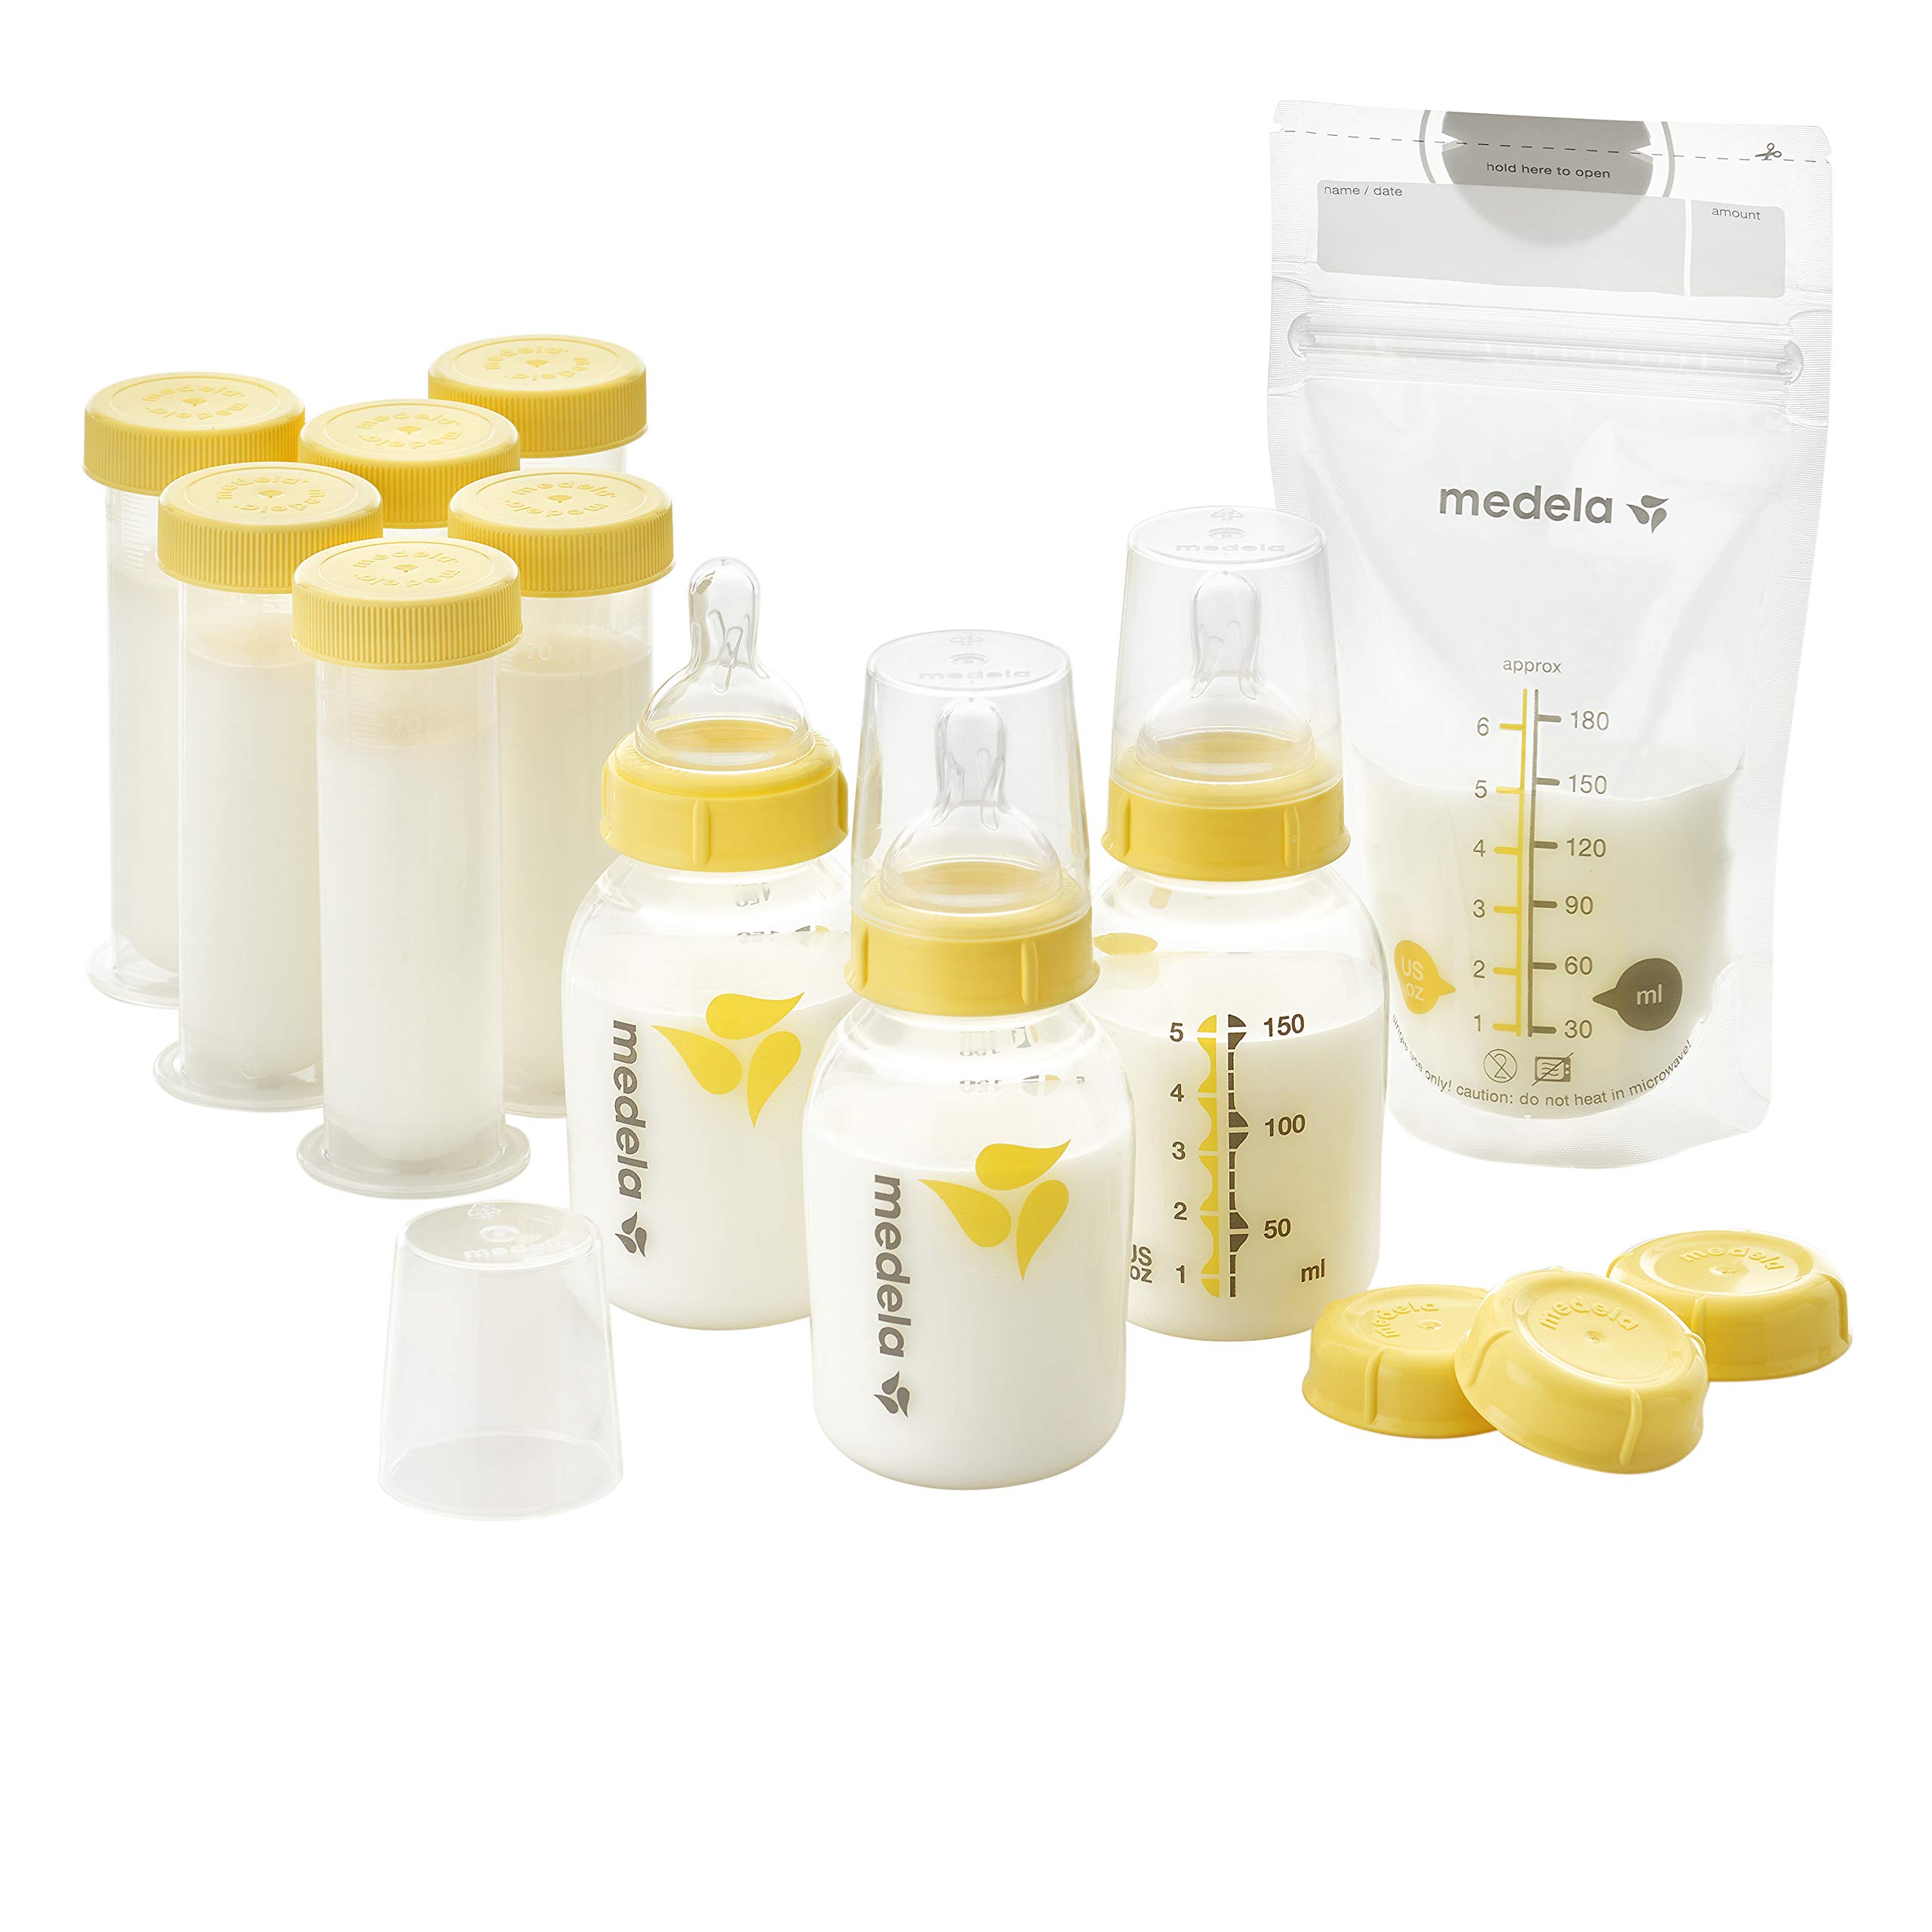 Medela Breastfeeding Gift Set, Breast Milk Storage System; Bottles, Nipples, Travel Caps, Breastmilk Storage Bags and More, Made Without BPA & Manual Breast Pump with Flex Shields Harmony Single Hand